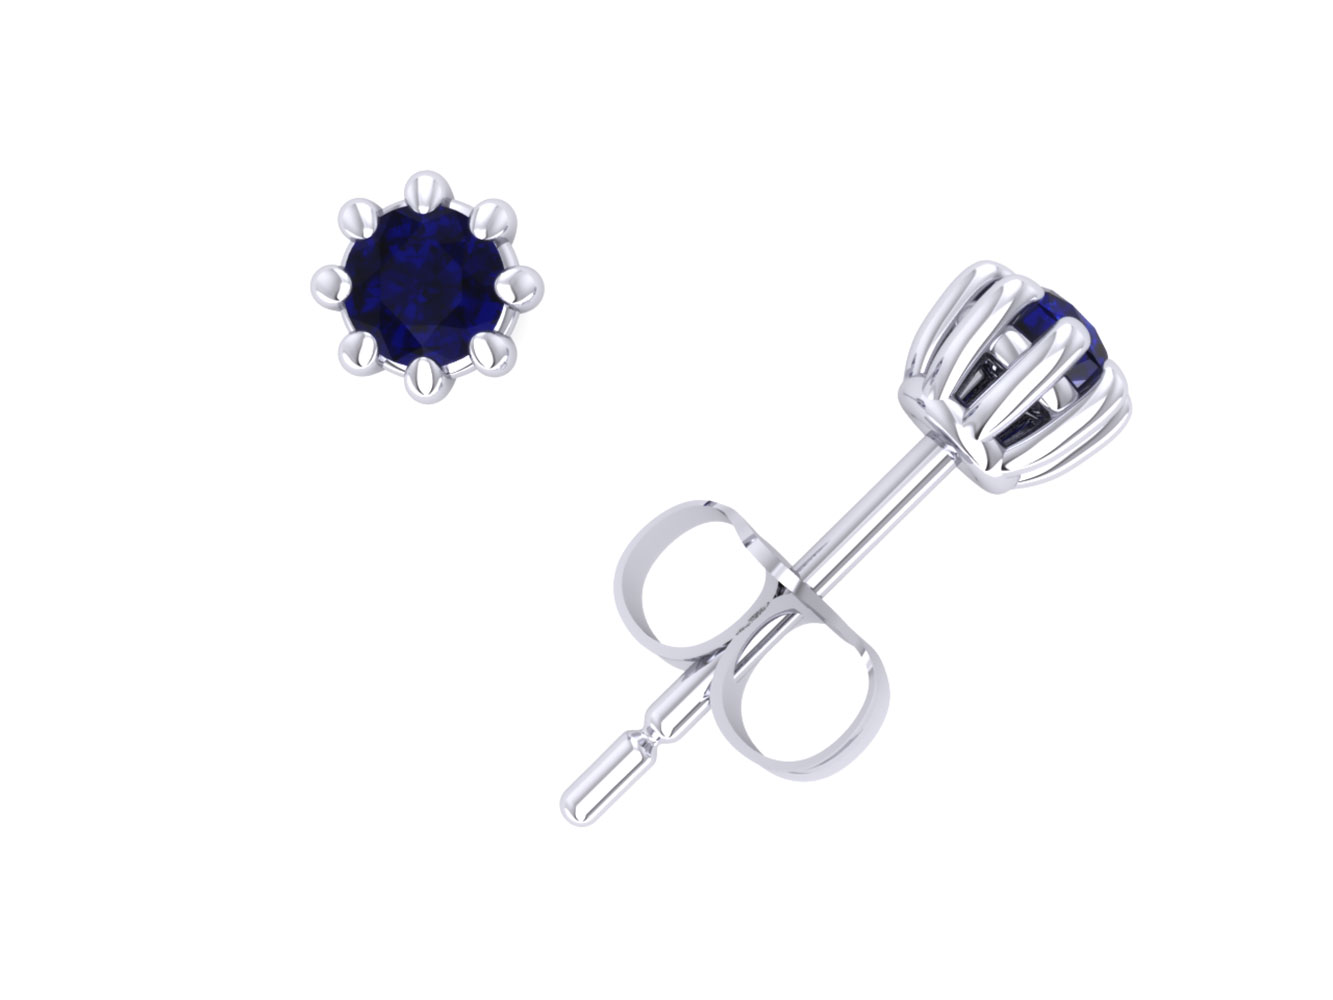 Jewel We Sell 0.33Ct Round Cut Blue Sapphire Basket Stud Earrings 14k White or Yellow Gold 8Prong Set AA Quality